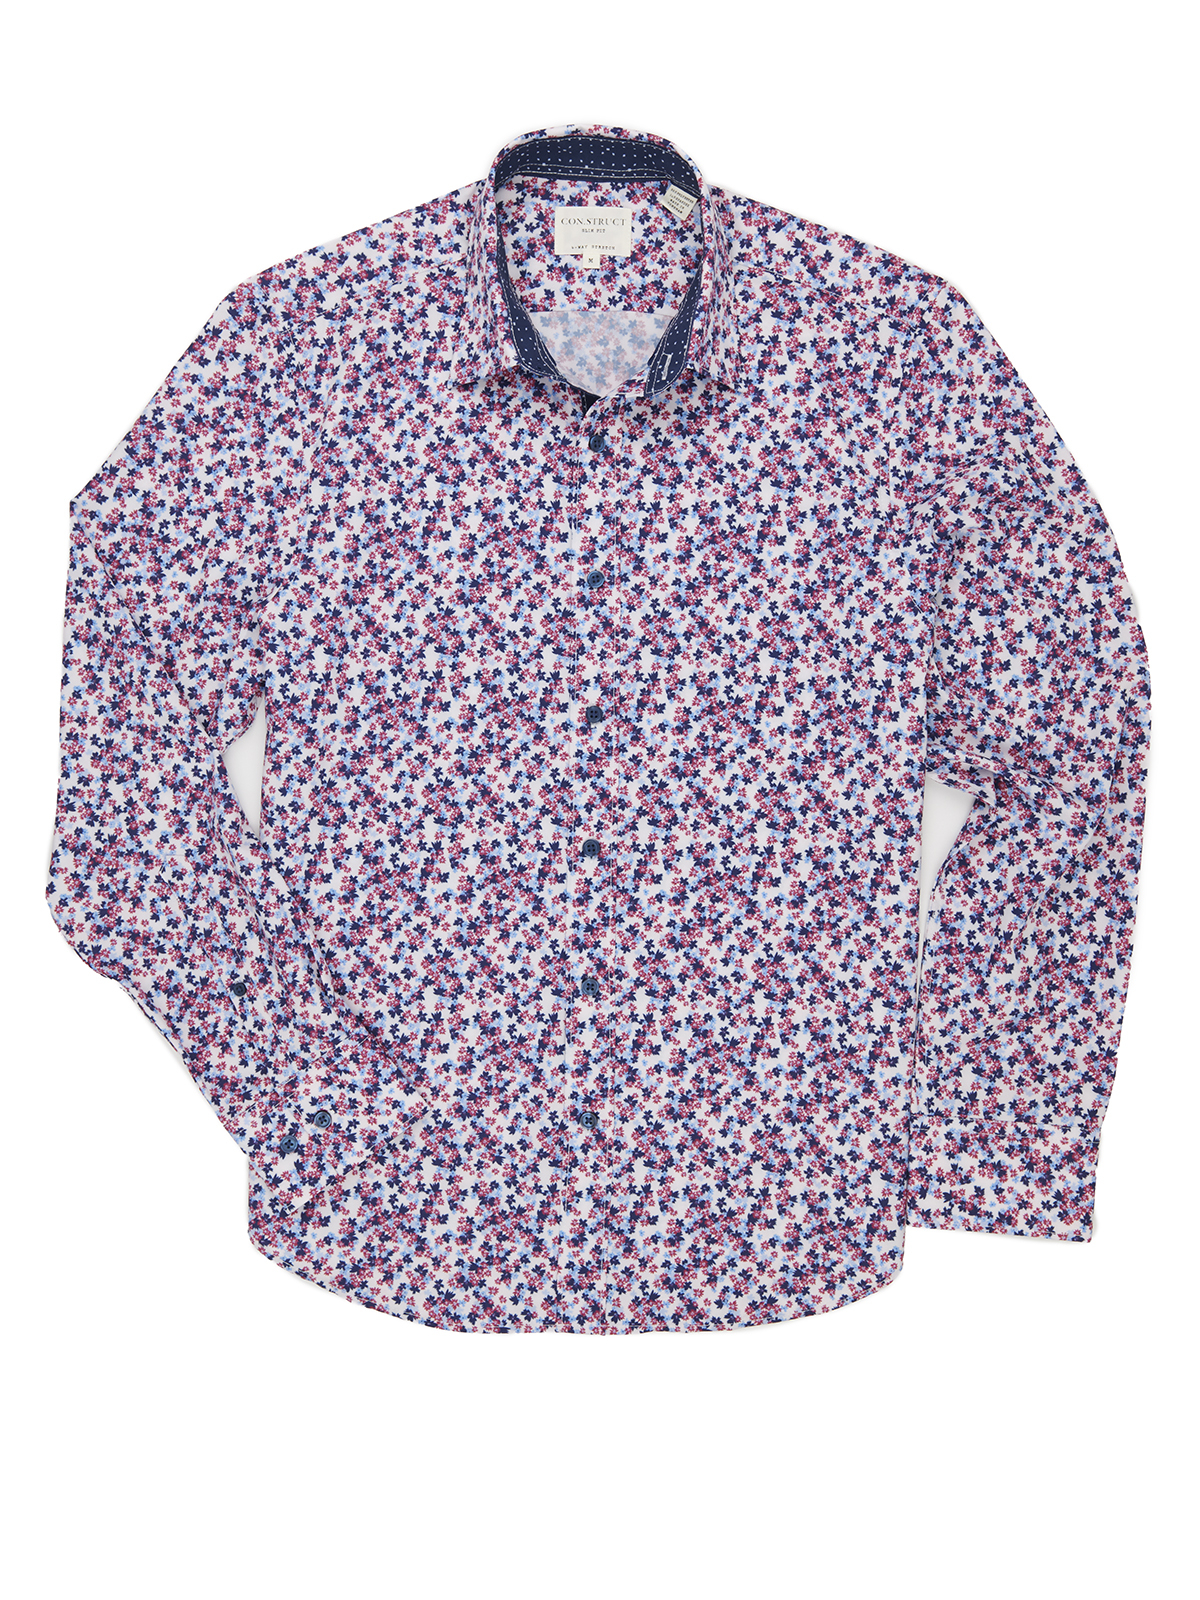 TOSSED FLORAL PERFORMANCE STRETCH LONG SLEEVE SHIRT